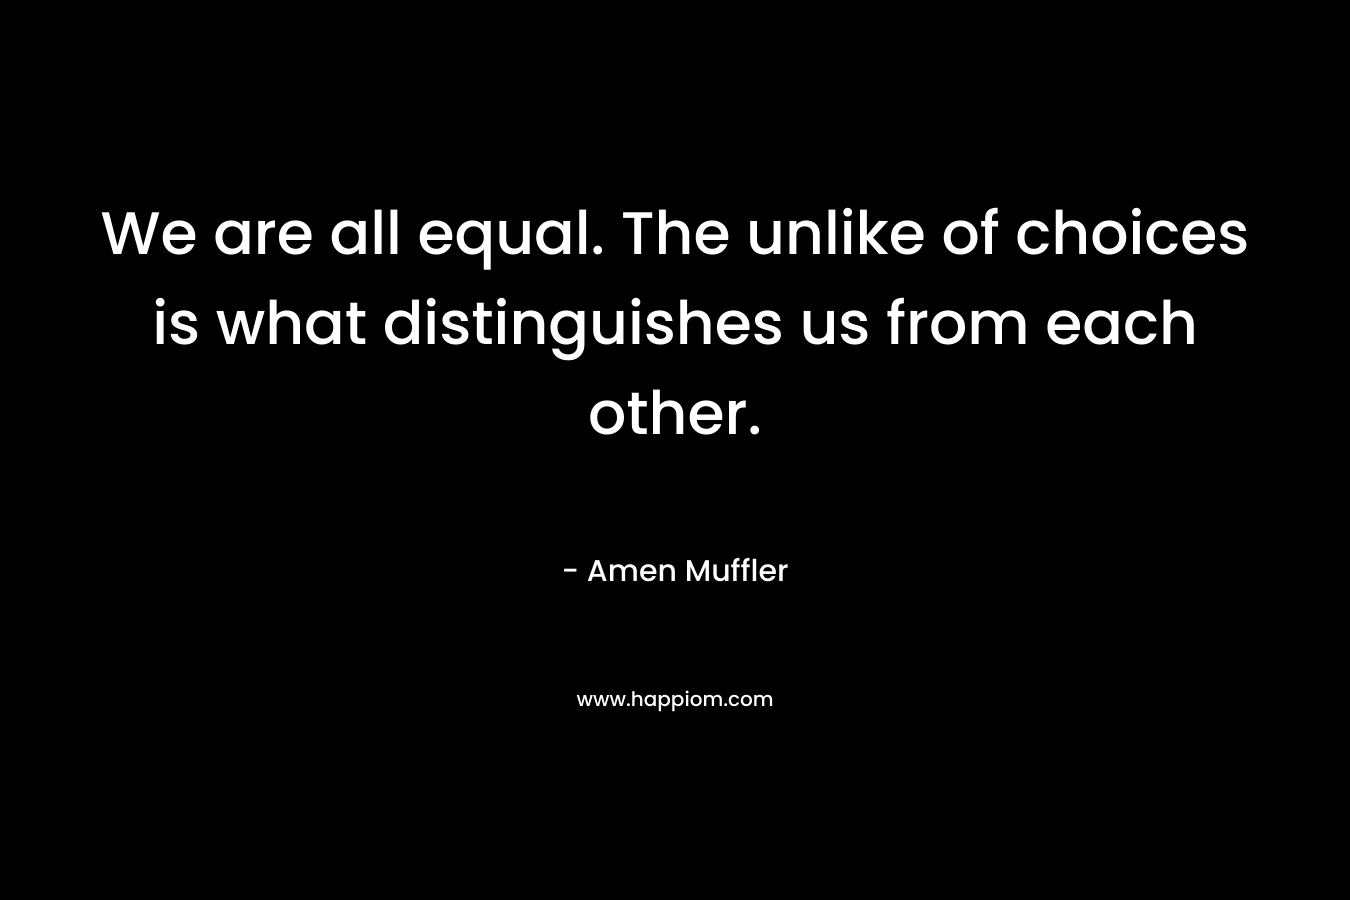 We are all equal. The unlike of choices is what distinguishes us from each other. – Amen Muffler